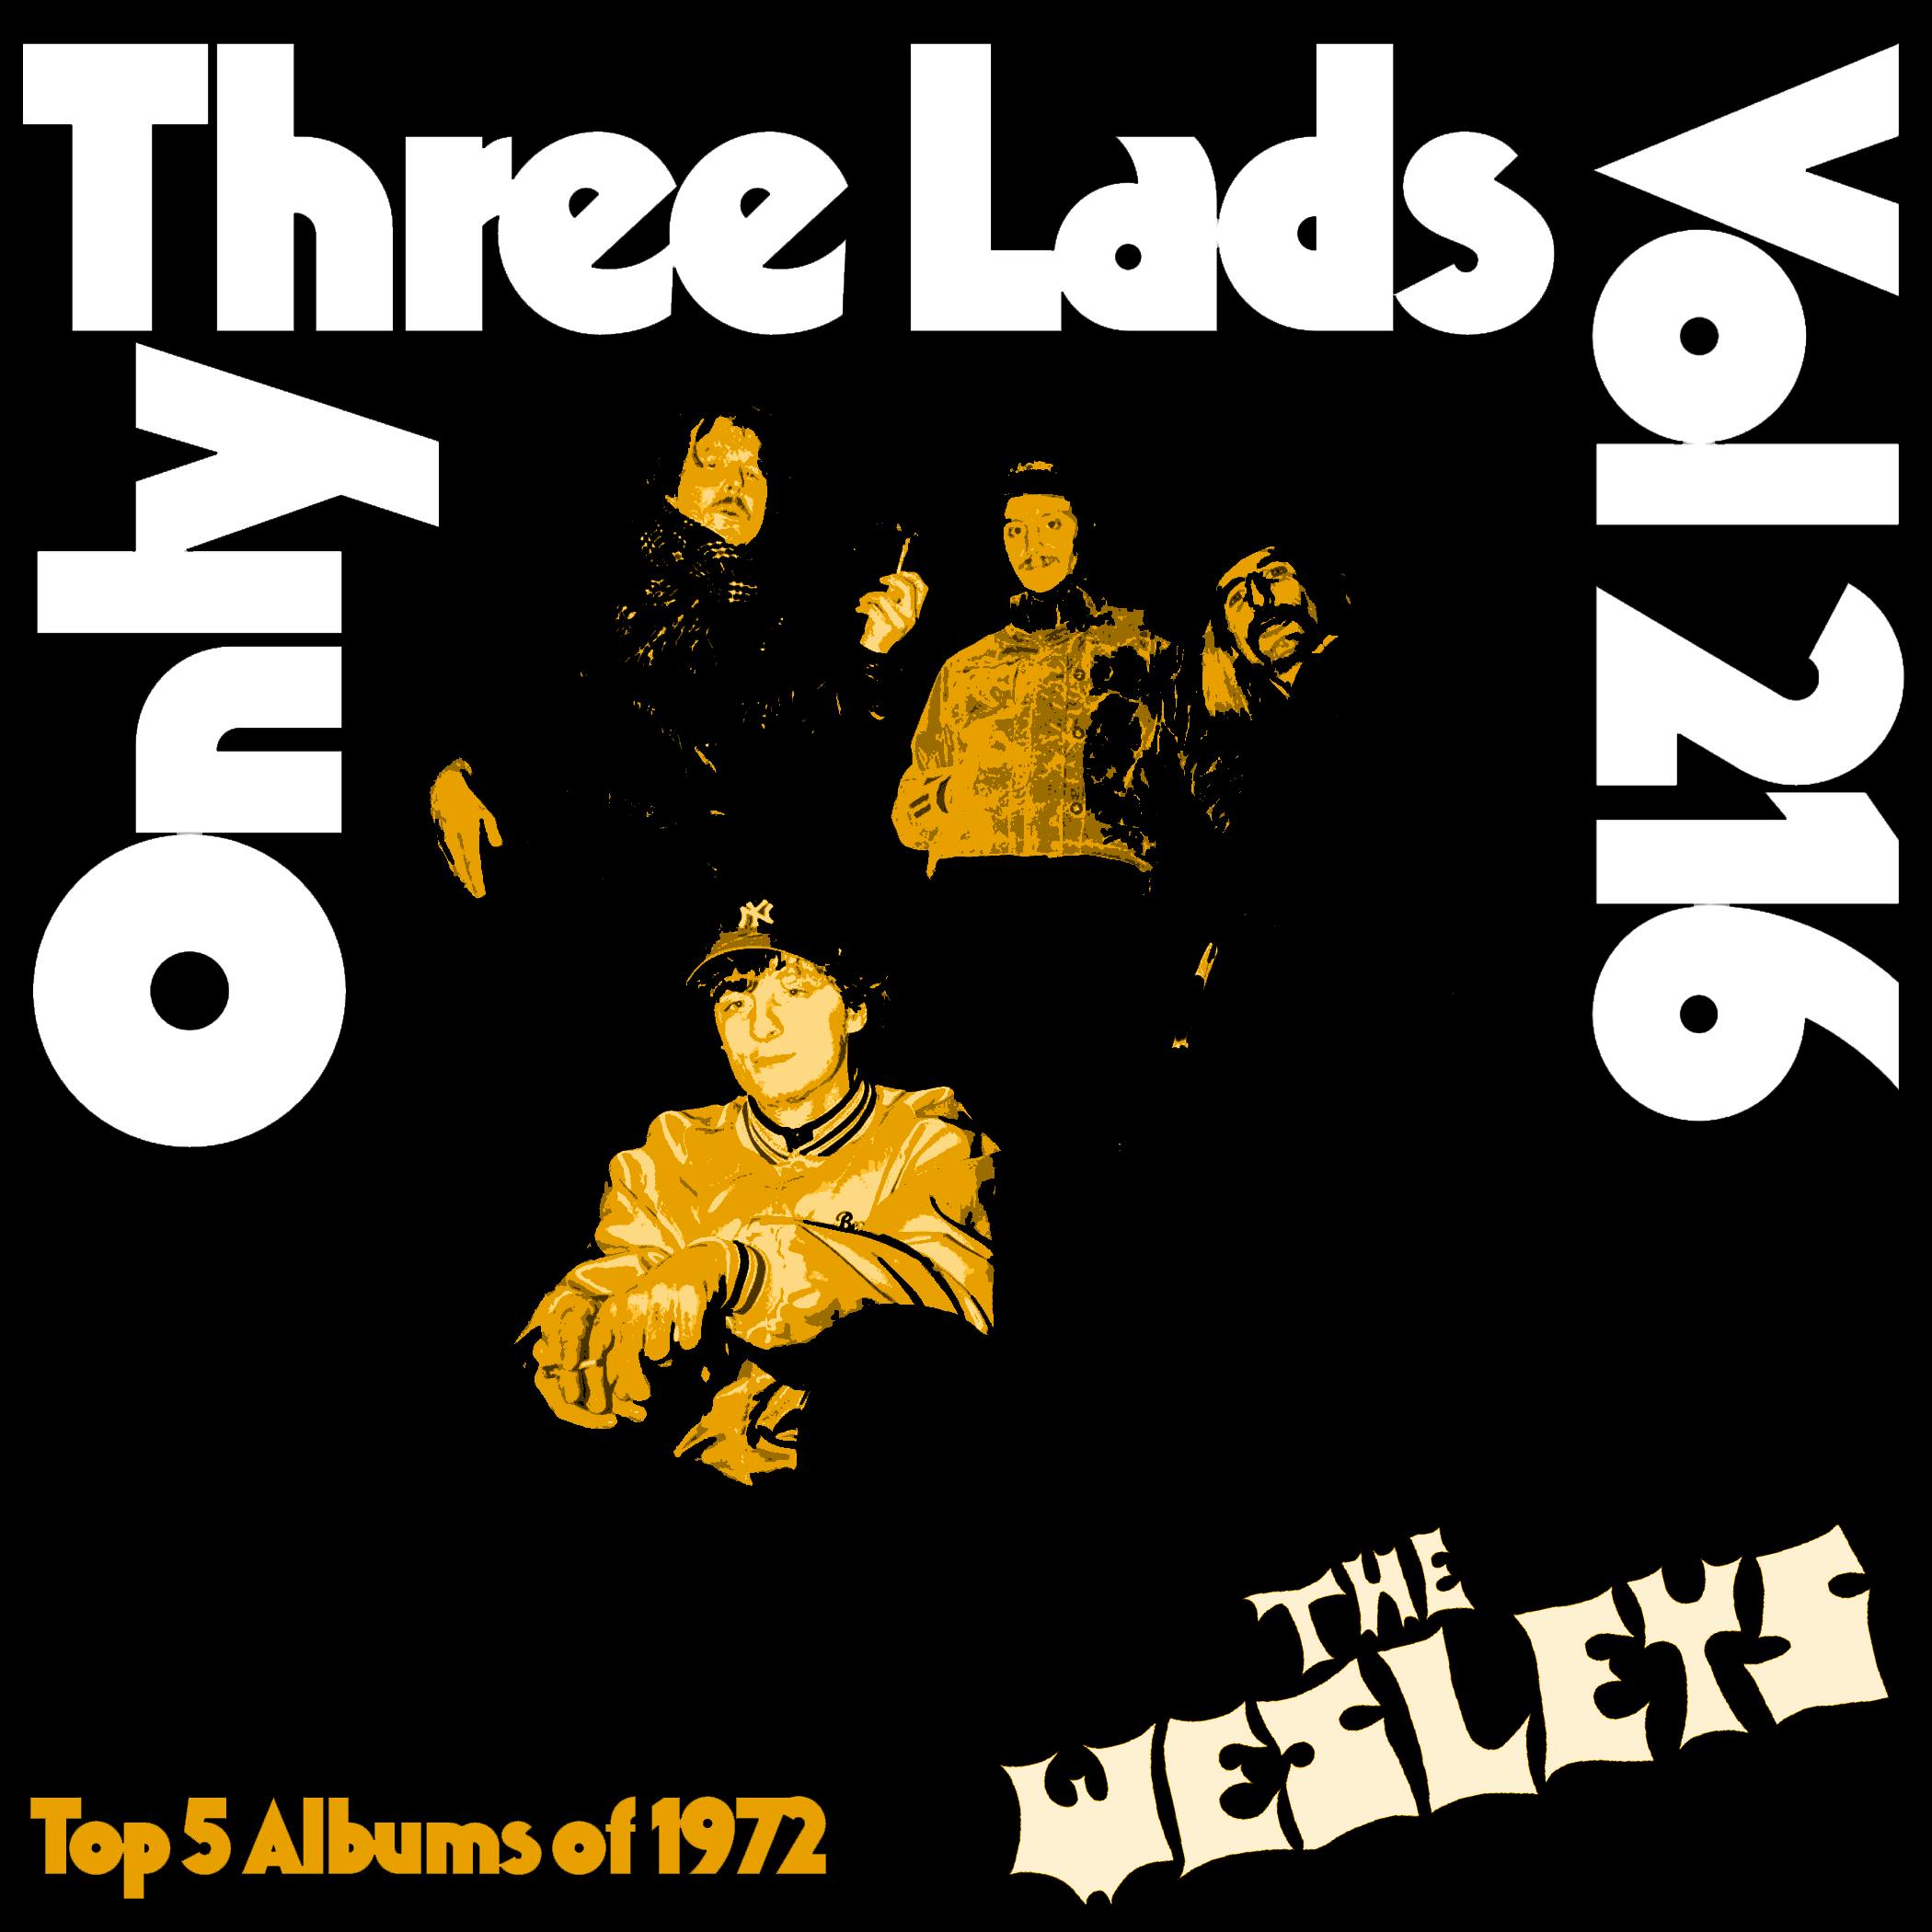 E216 - Top 5 Albums of 1972 (with The Wesleys)